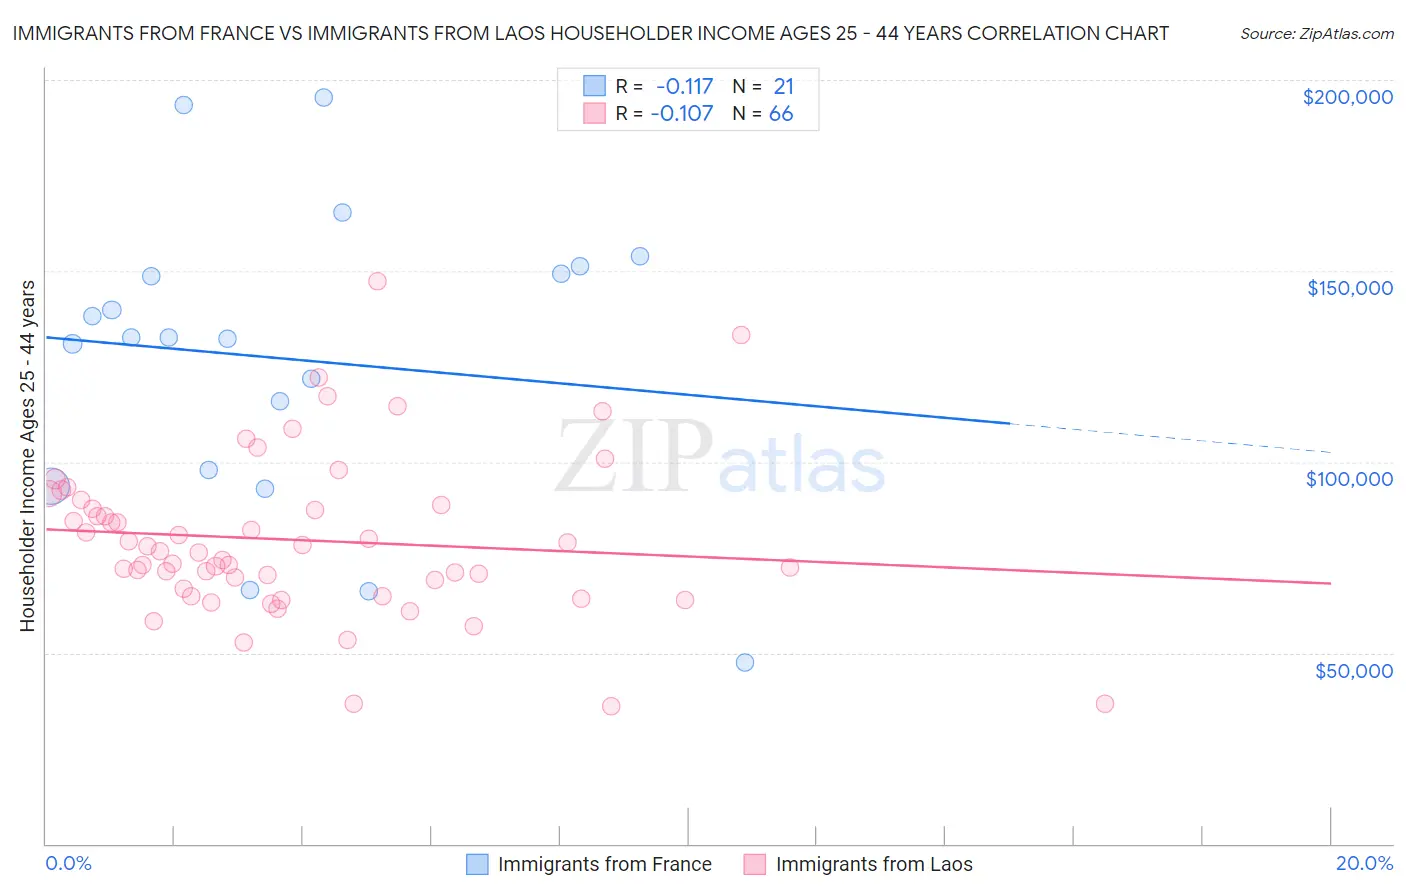 Immigrants from France vs Immigrants from Laos Householder Income Ages 25 - 44 years